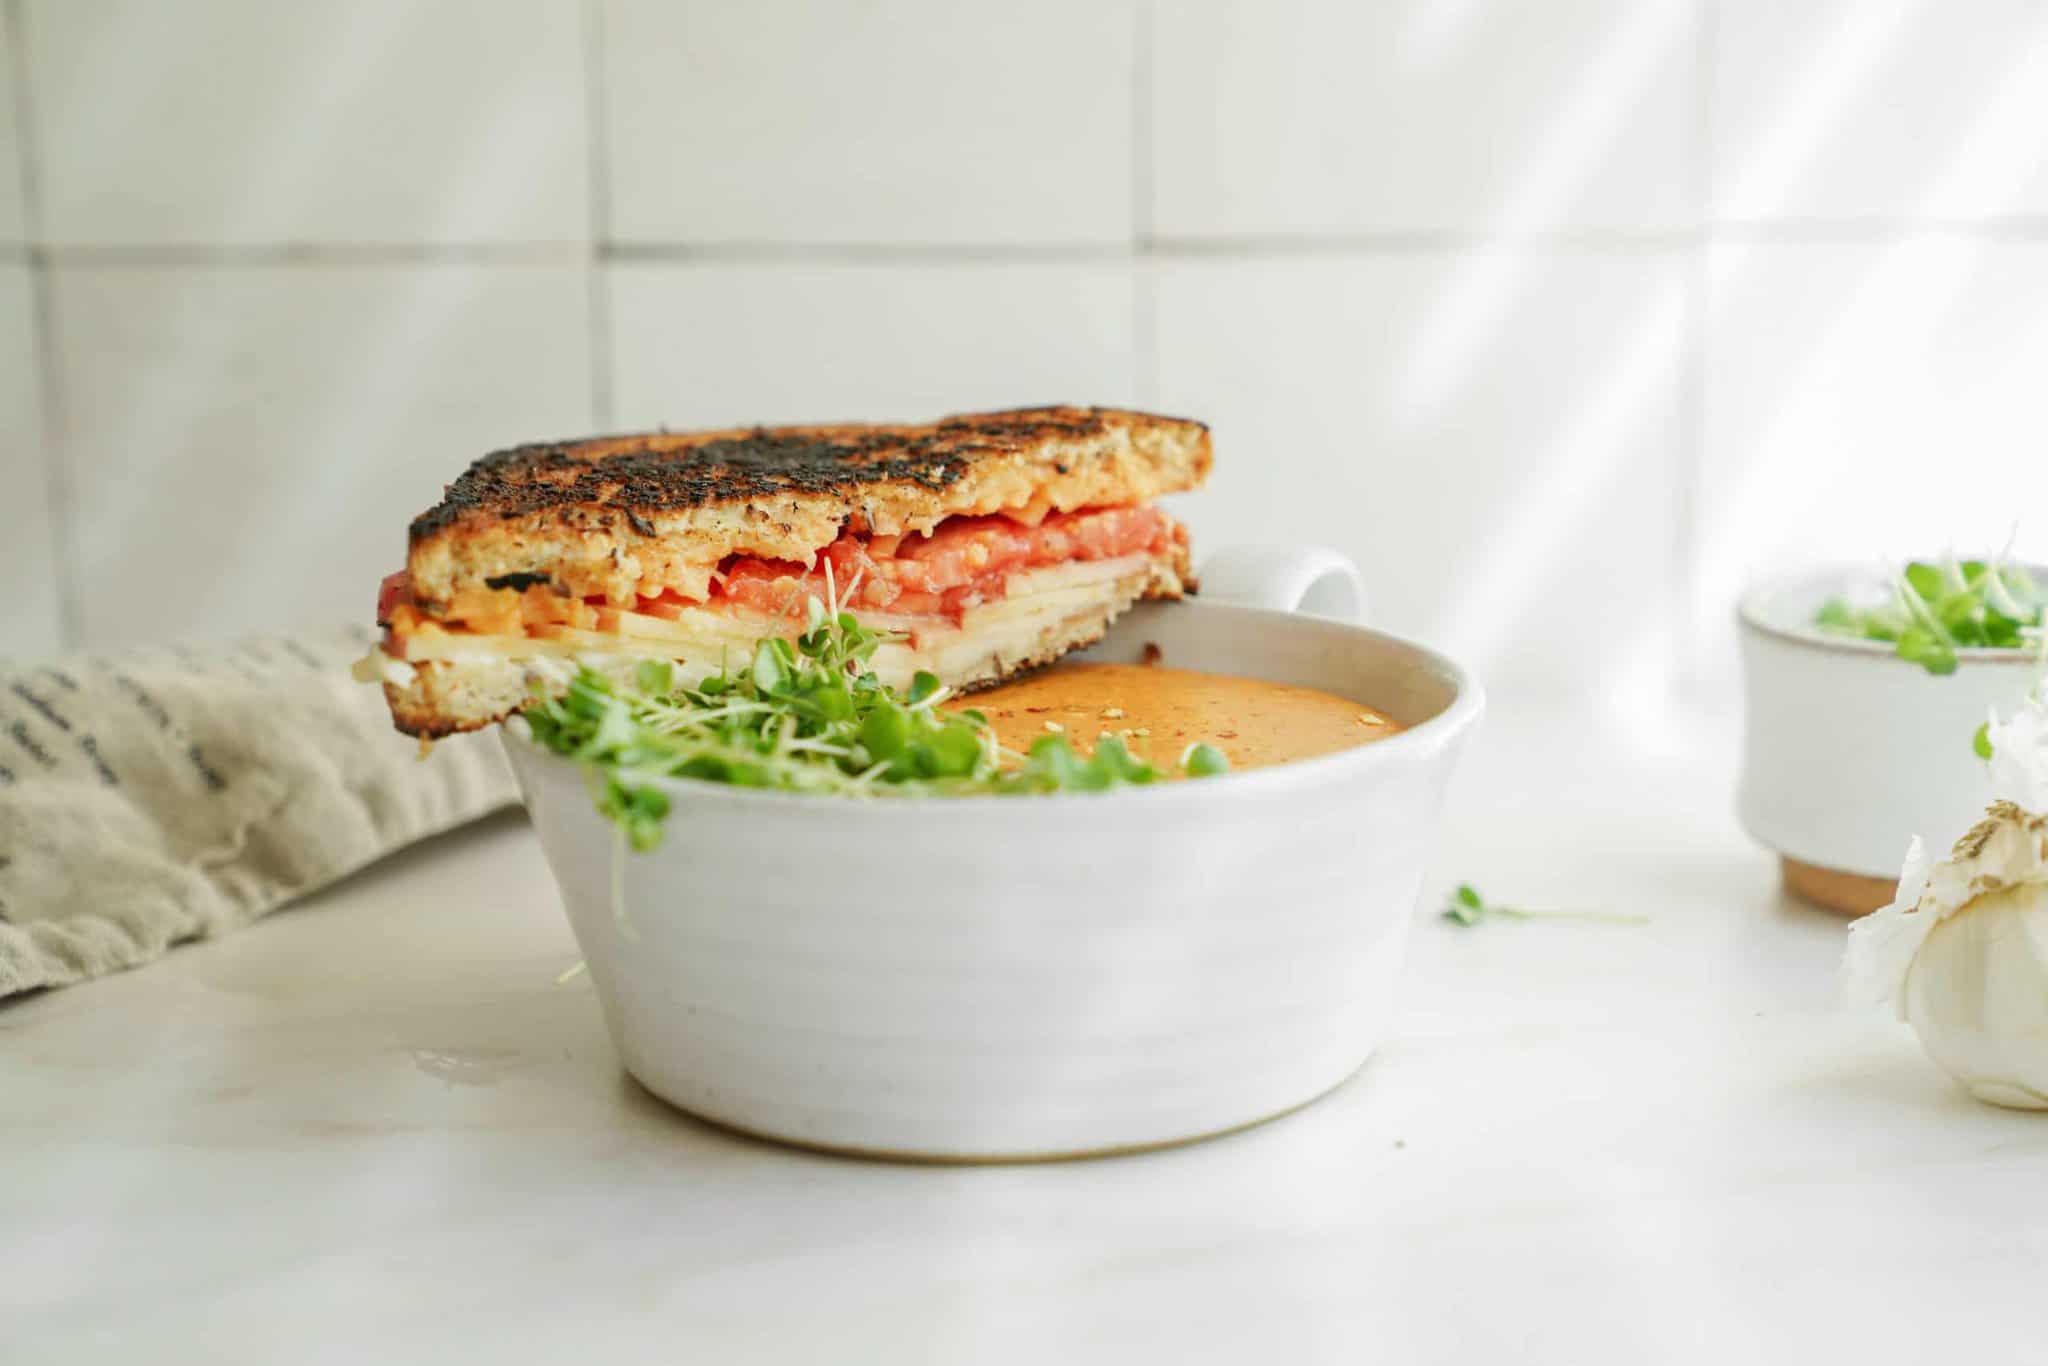 Creamy tomato soup in a white bowl with a sandwich on top